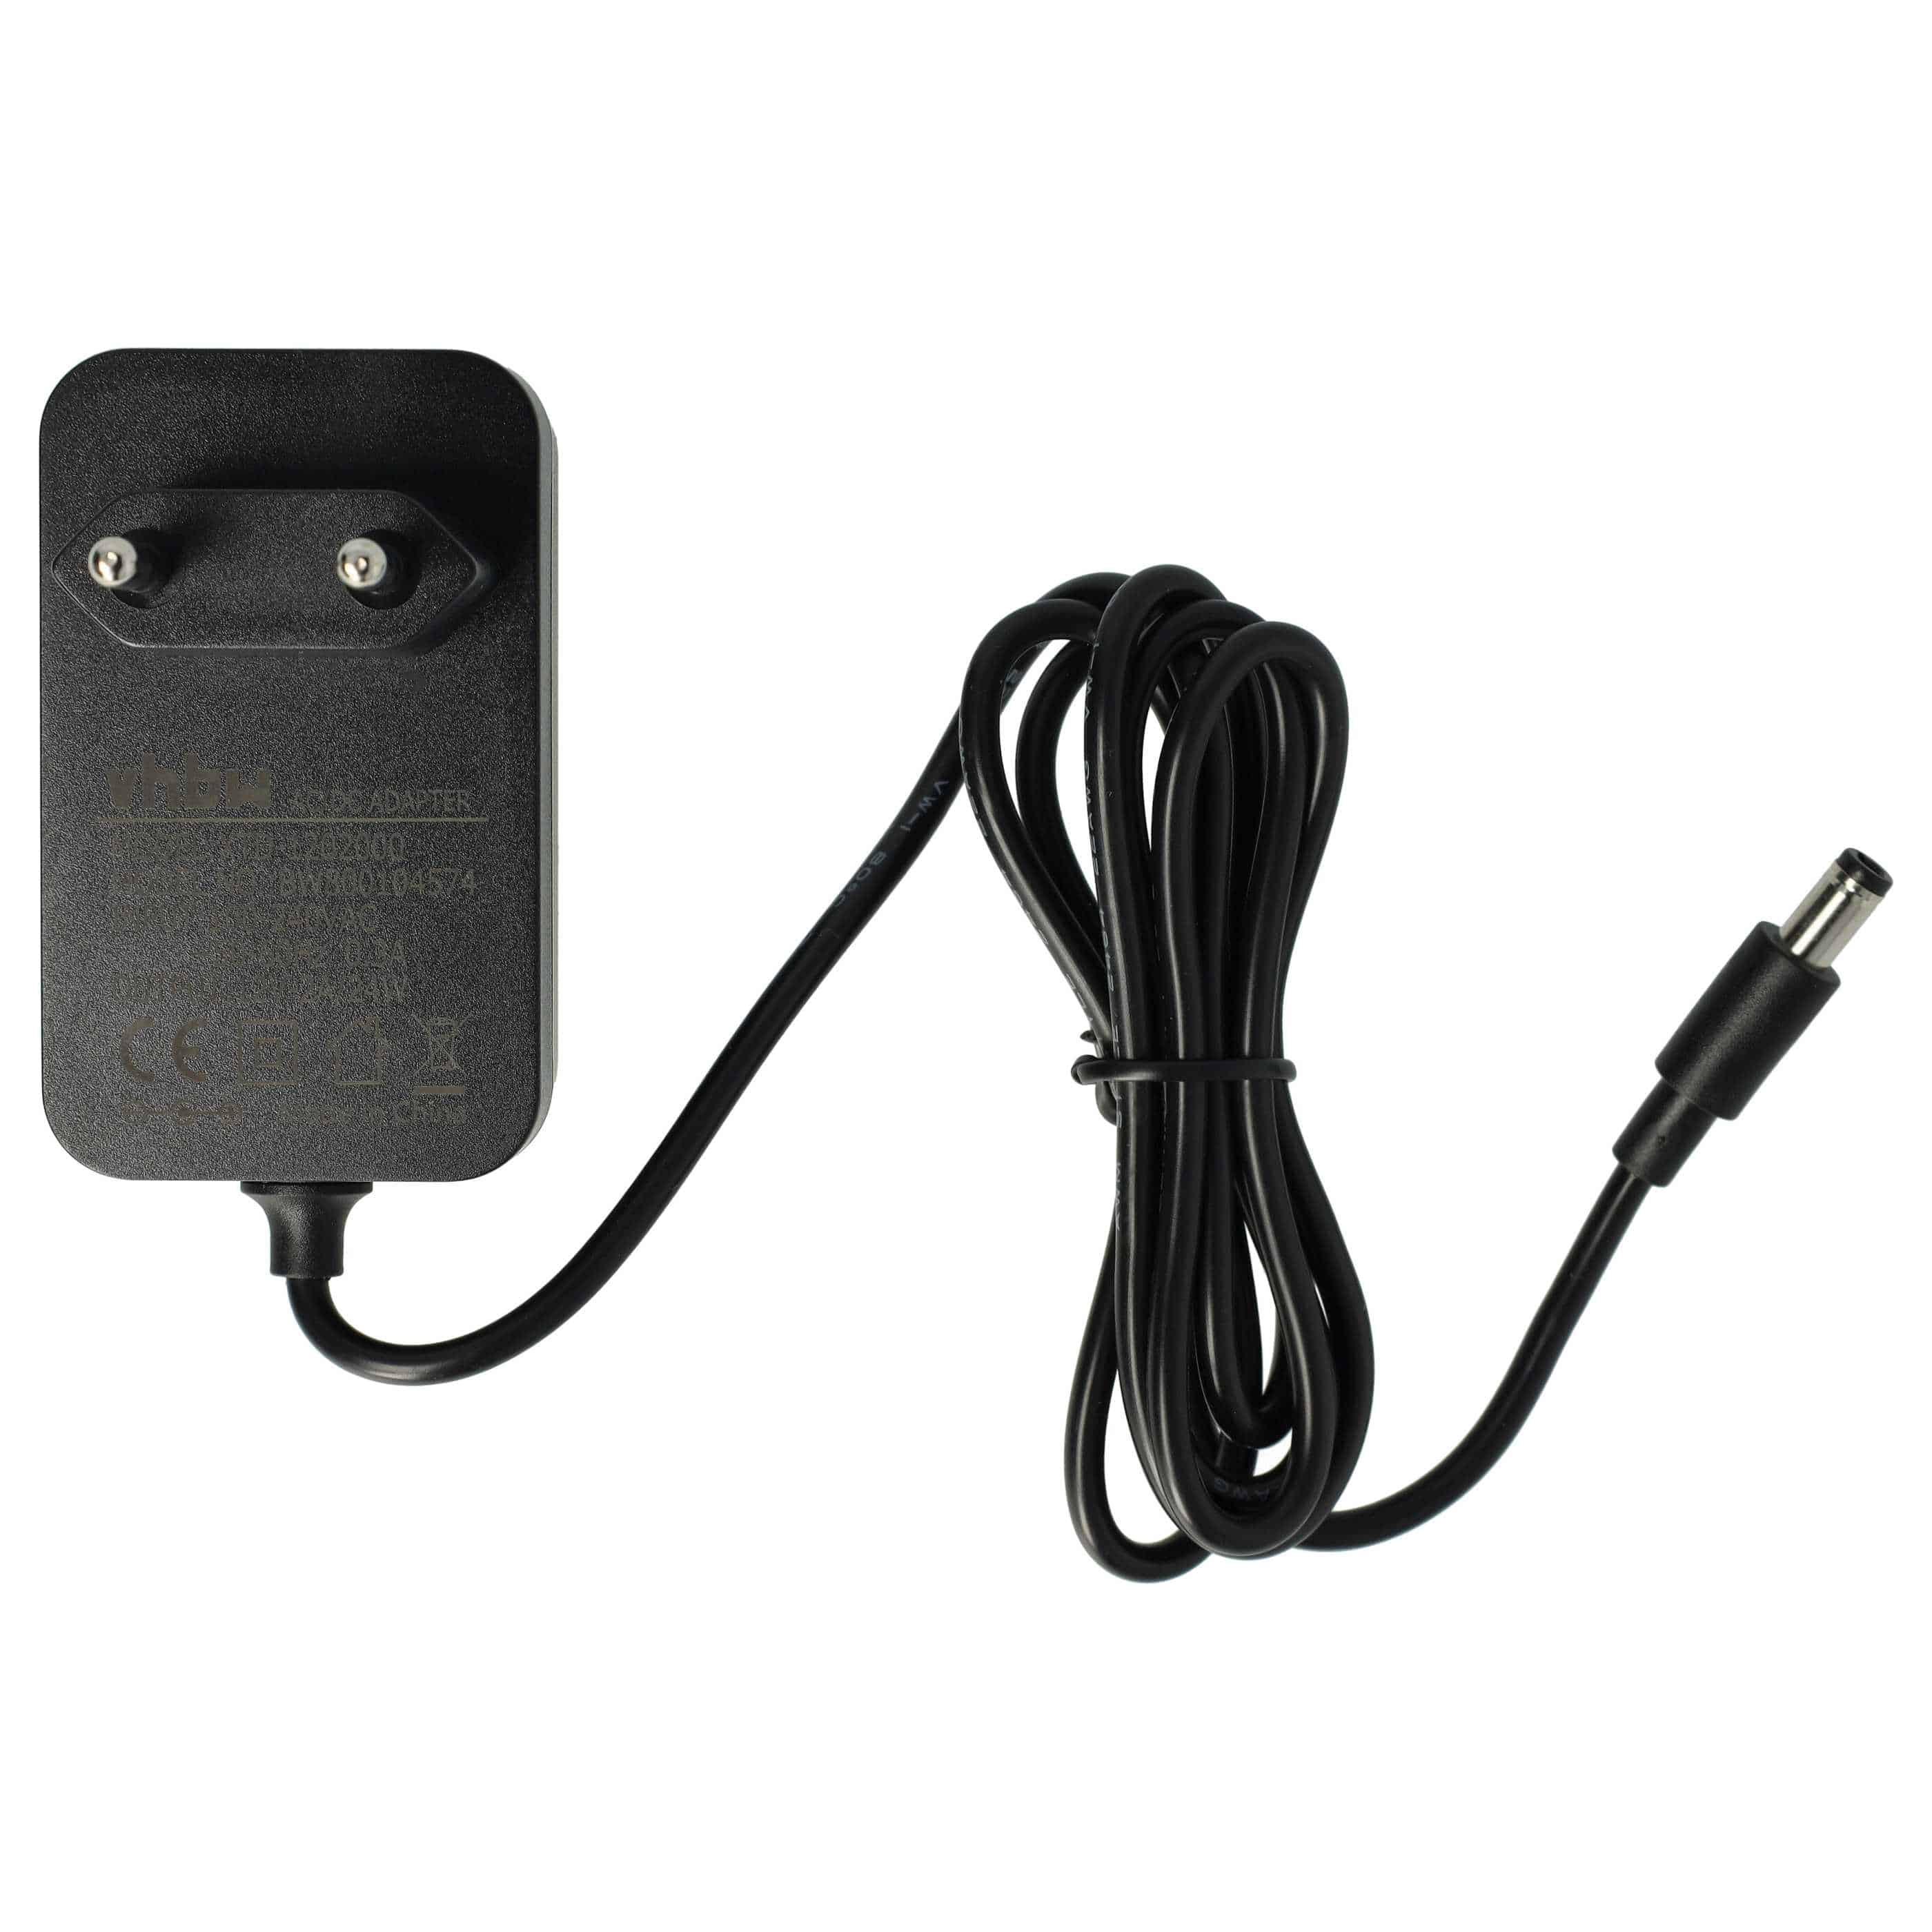 Mains Power Adapter replaces AVM 311POW165, 311POW134 for Huawei router etc. - 140 cm